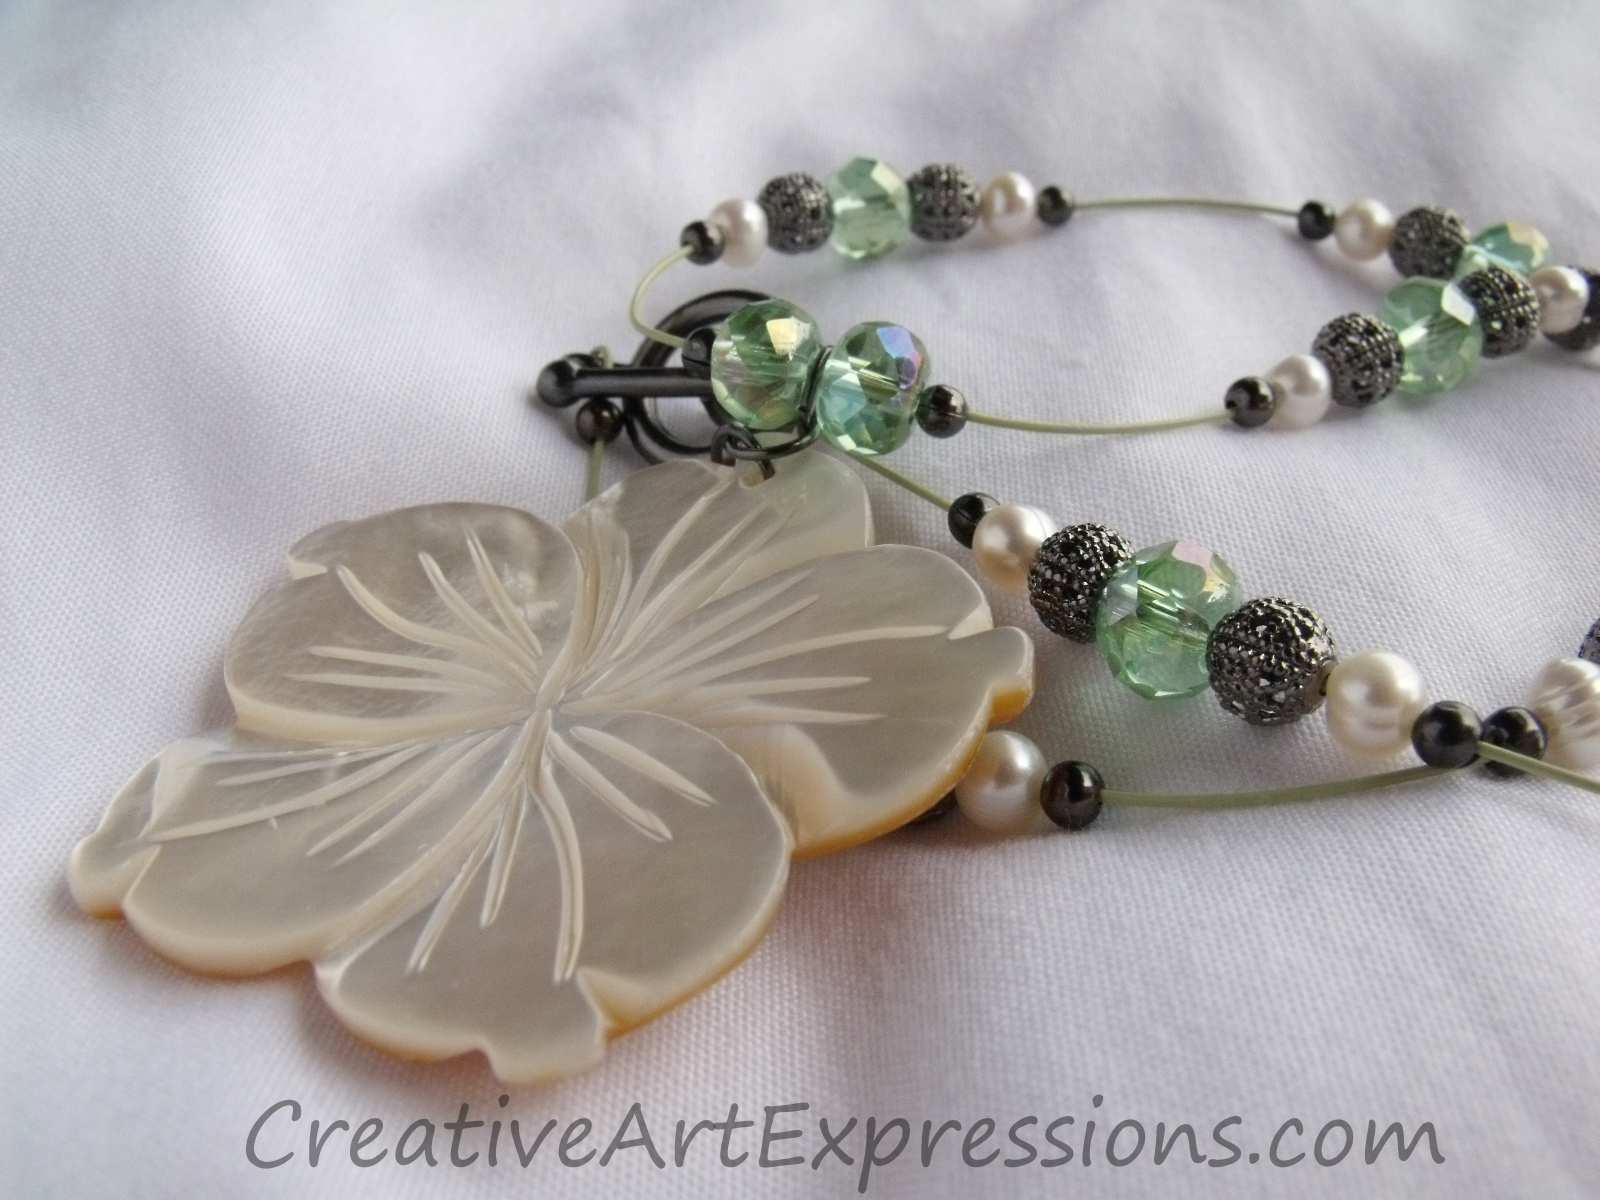 Creative Art Expressions Handmade Poppy Shell & Pearl Necklace